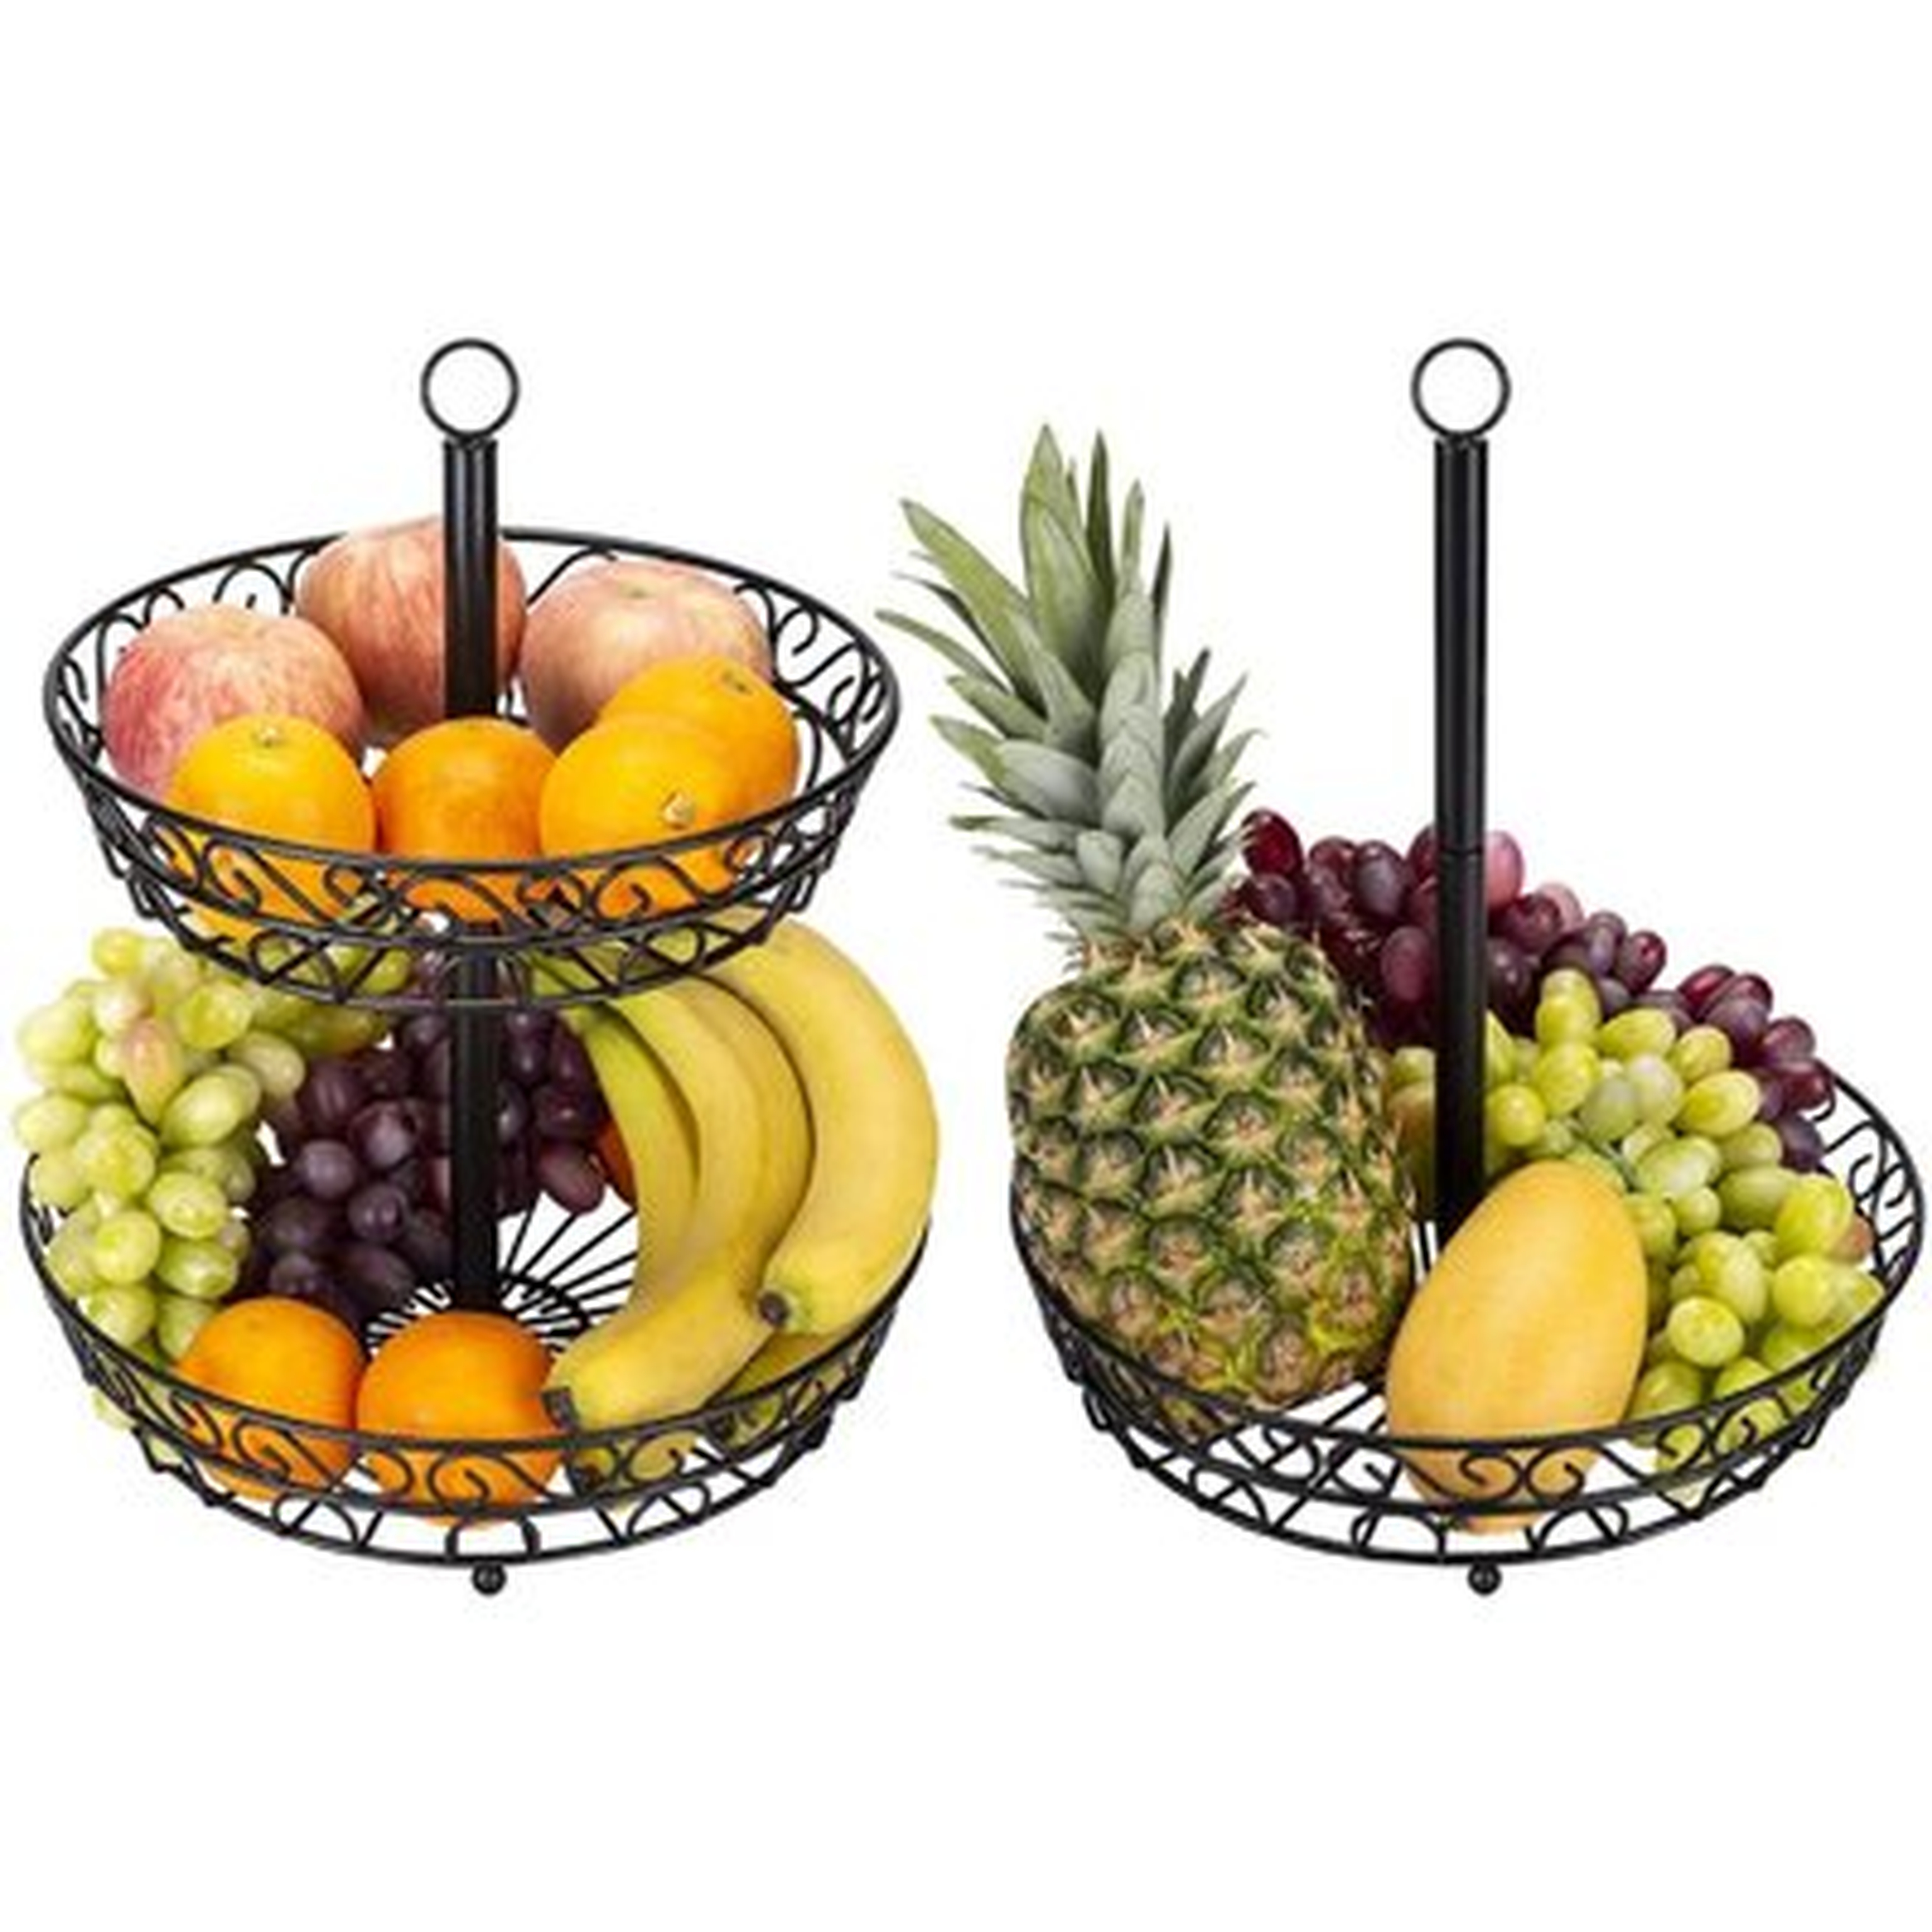 Fruit Basket Cake Stand With 2 Tiers, Fruit Bowl Vegetable Basket Made Of Metal, Decorative Fruit Basket For More Space On The Worktop, Cake Stands With Fruit Bowls - Wayfair